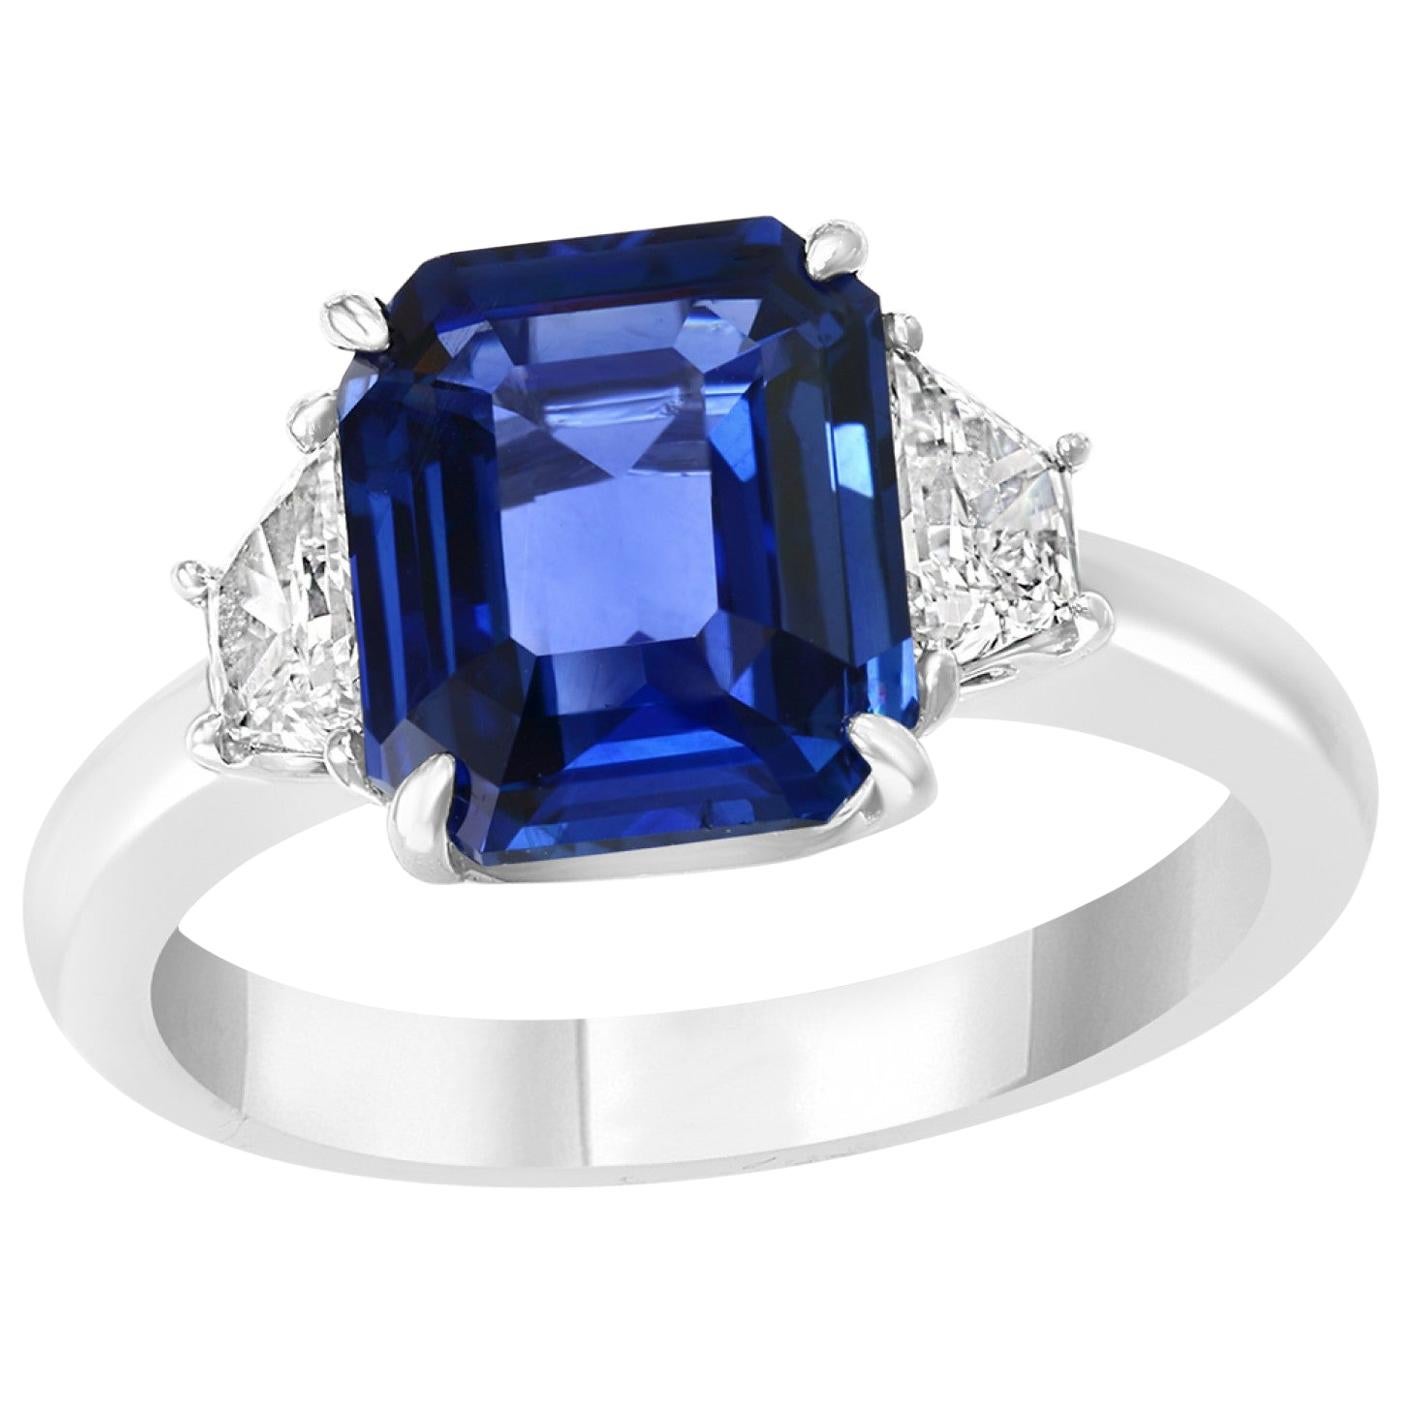 5.11 Carat Emerald Cut Sapphire with Two Accent Diamonds Totaling .52 Carat For Sale